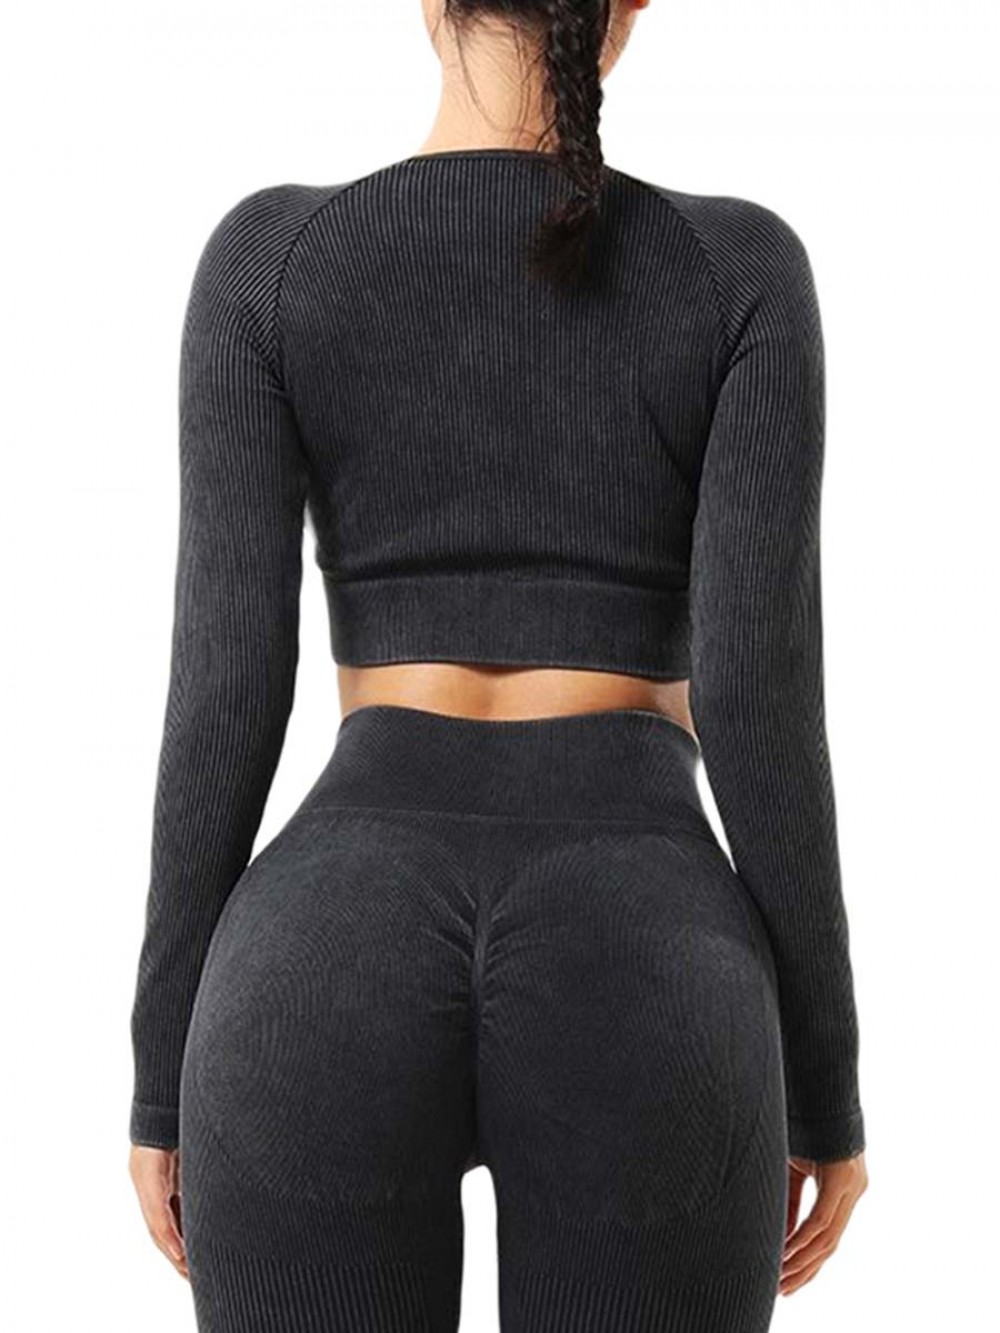 Spring Tight Long Sleeve Tight Crop Tops